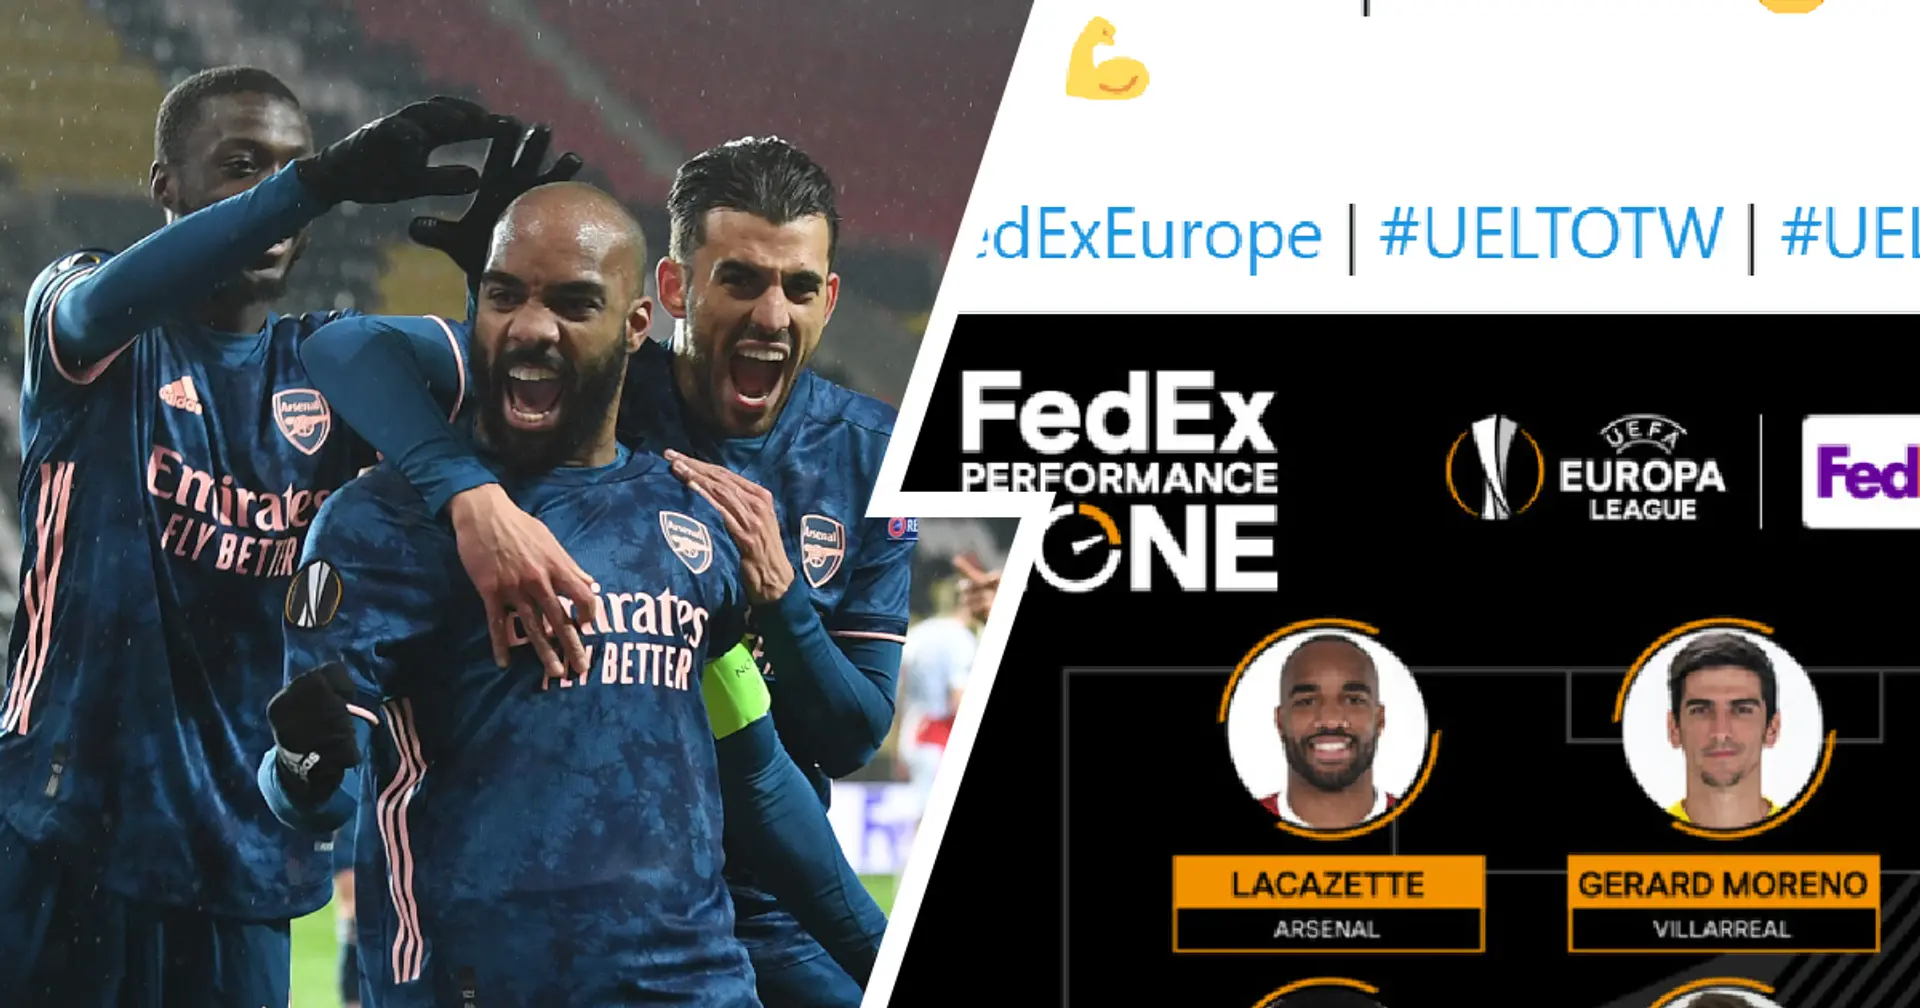 Nico-Laca-Saka going strong: 5 Arsenal players named in Europa League Team of the Week